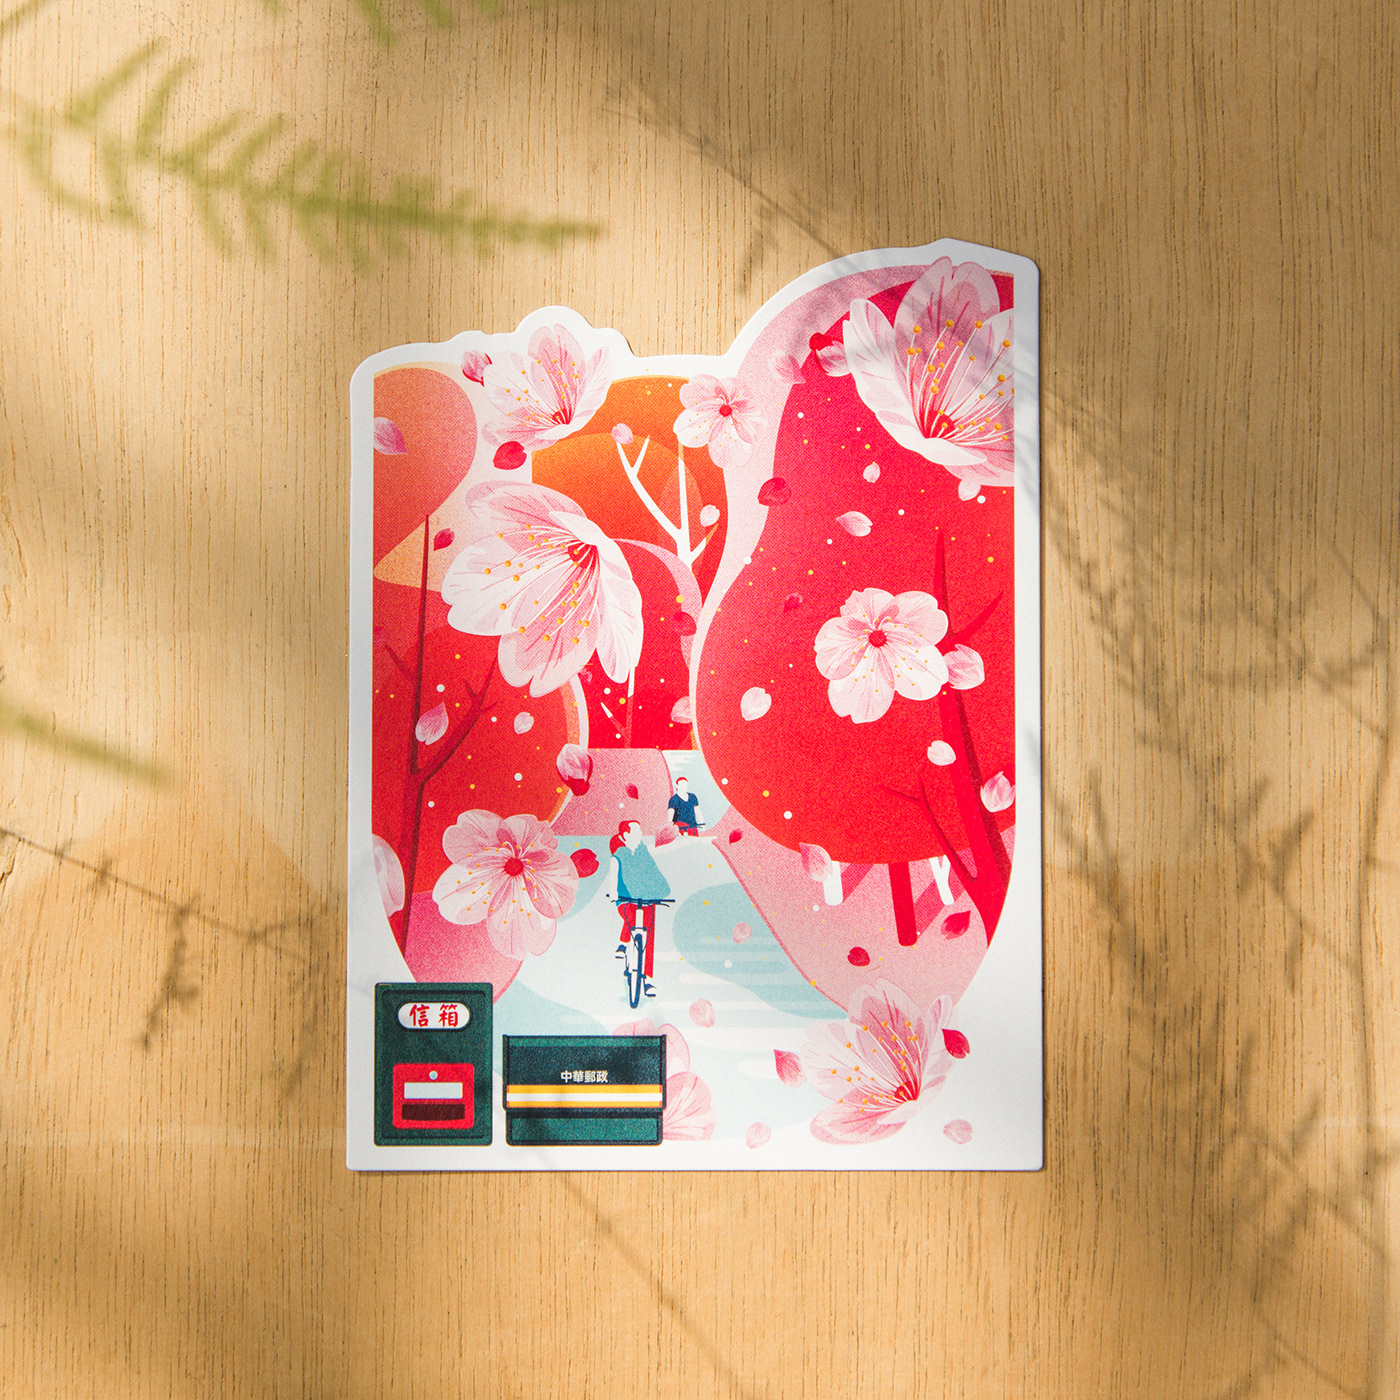 taiwan designer graphic Illustrator Postercard 花博 post office taichung World Flora Exposition card